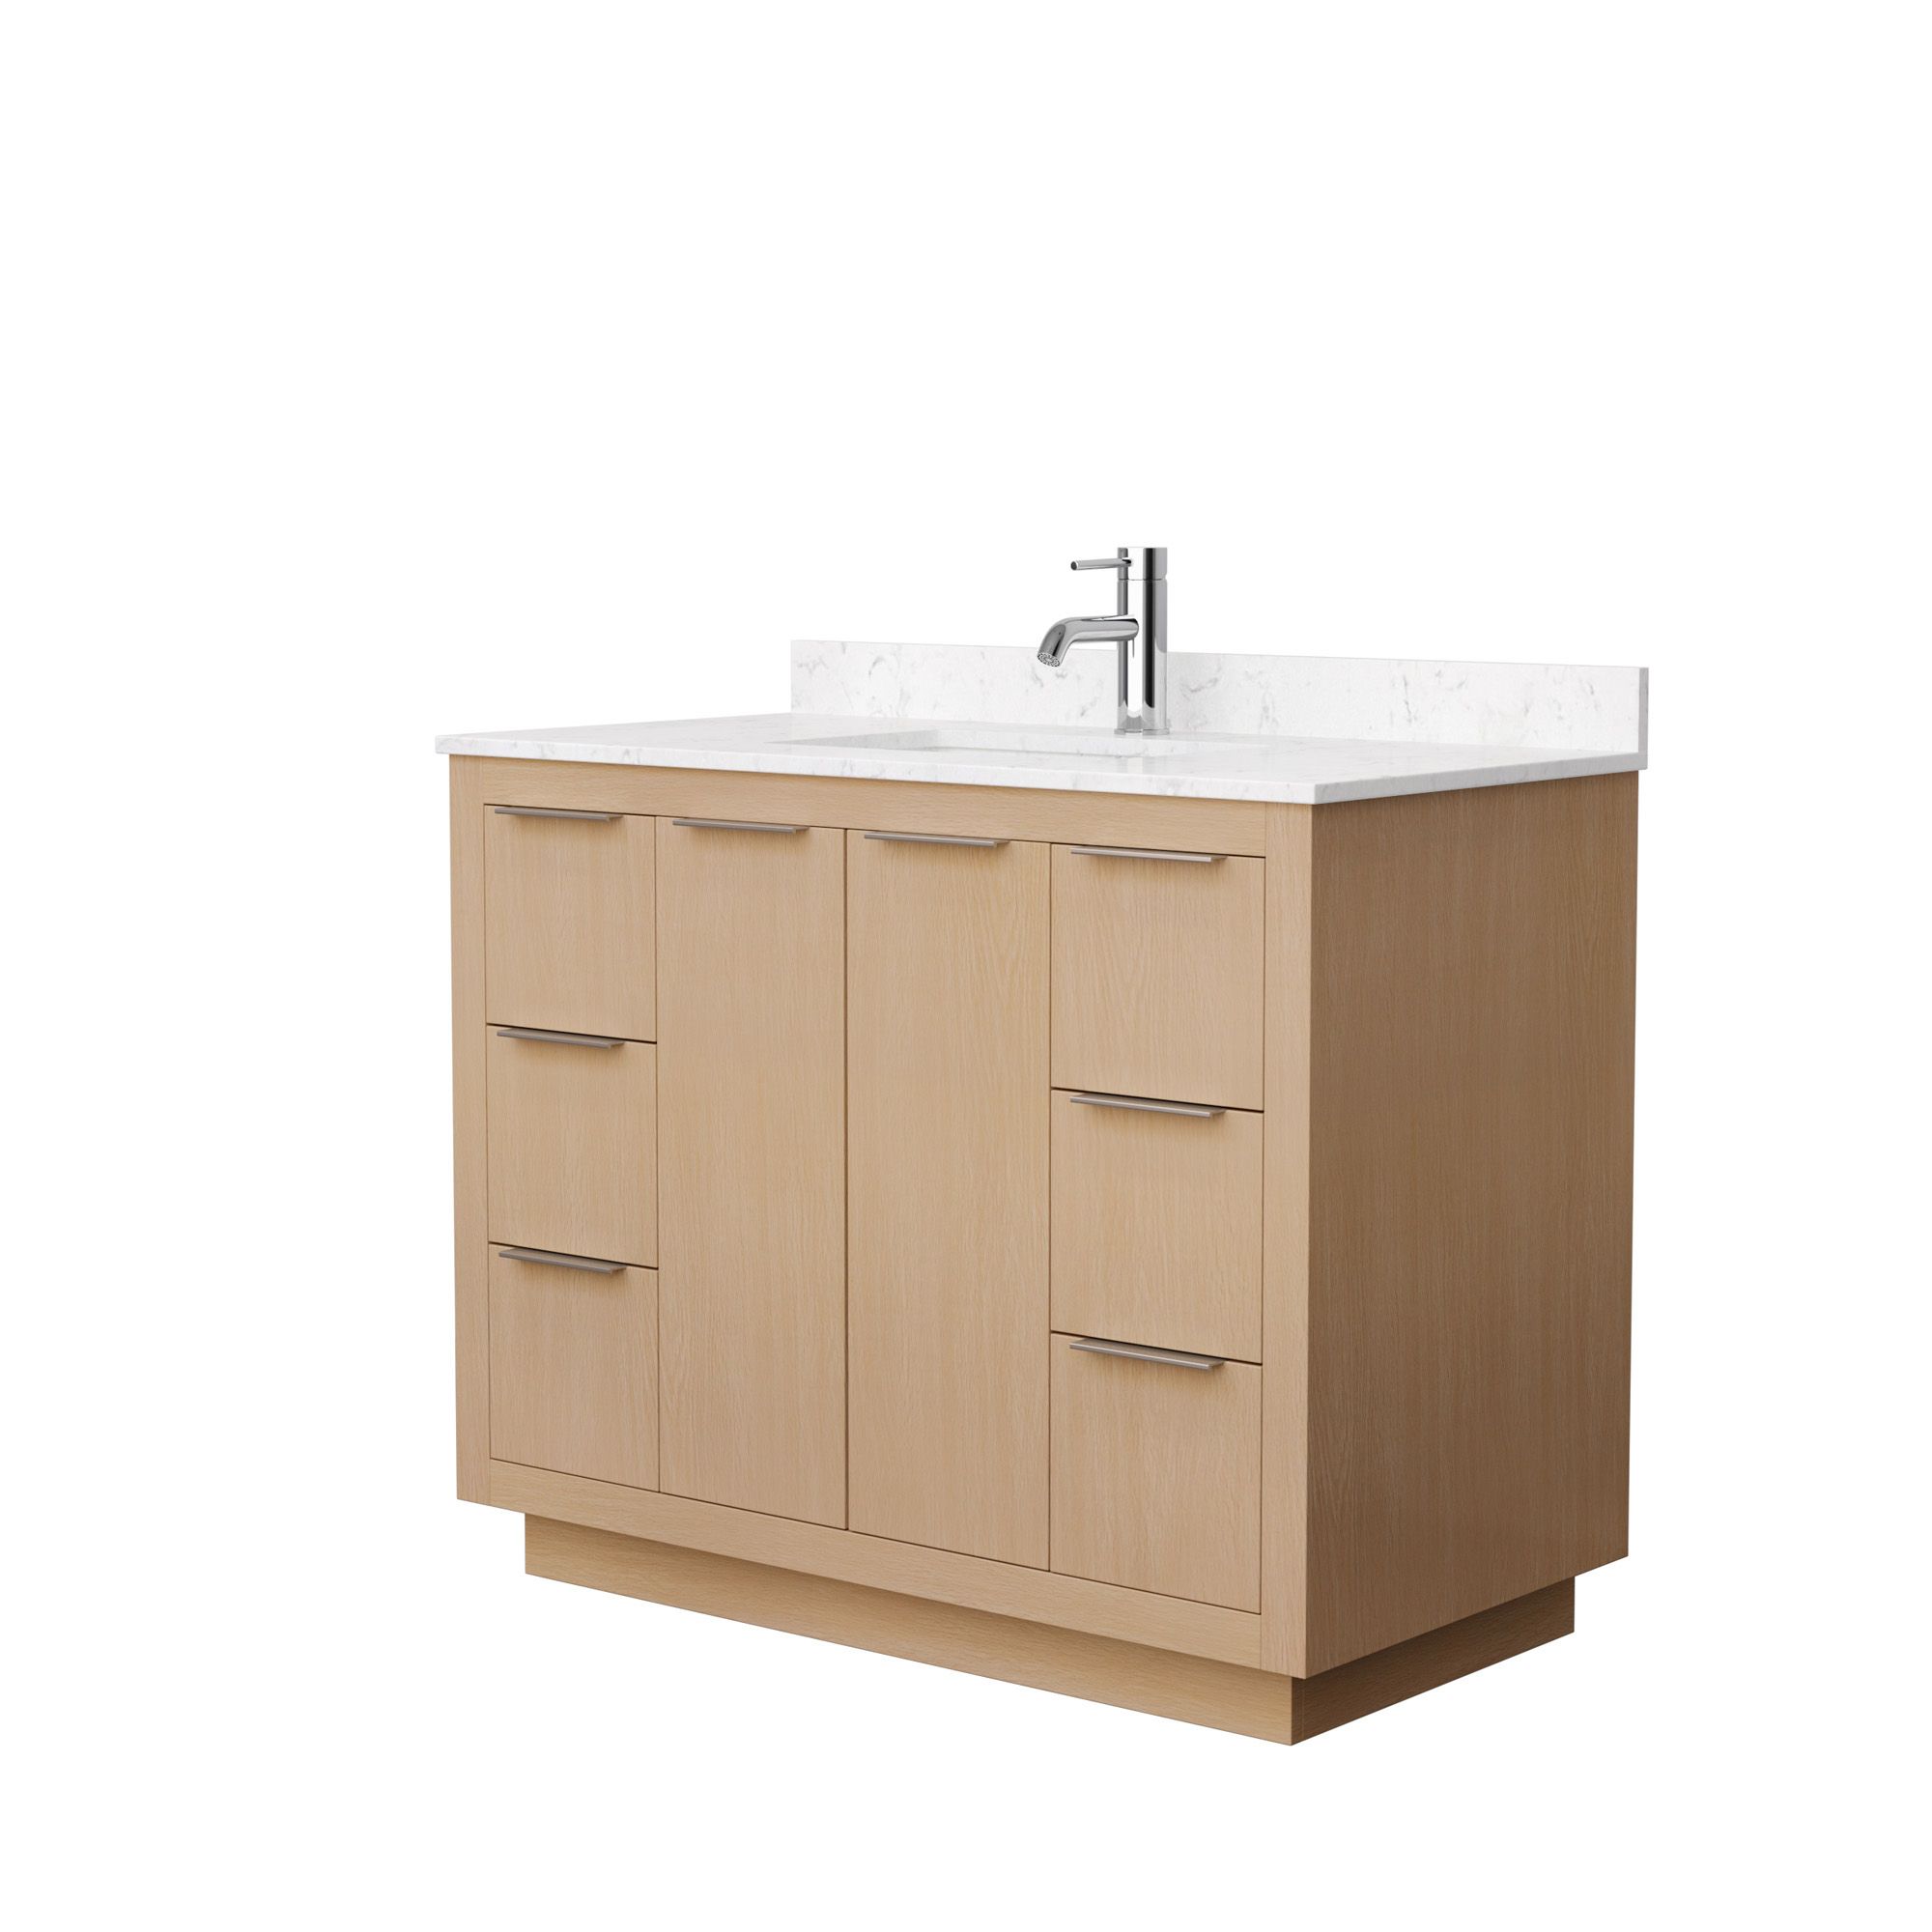 42" Single Bathroom Vanity in Light Straw with Countertop and Hardware Options